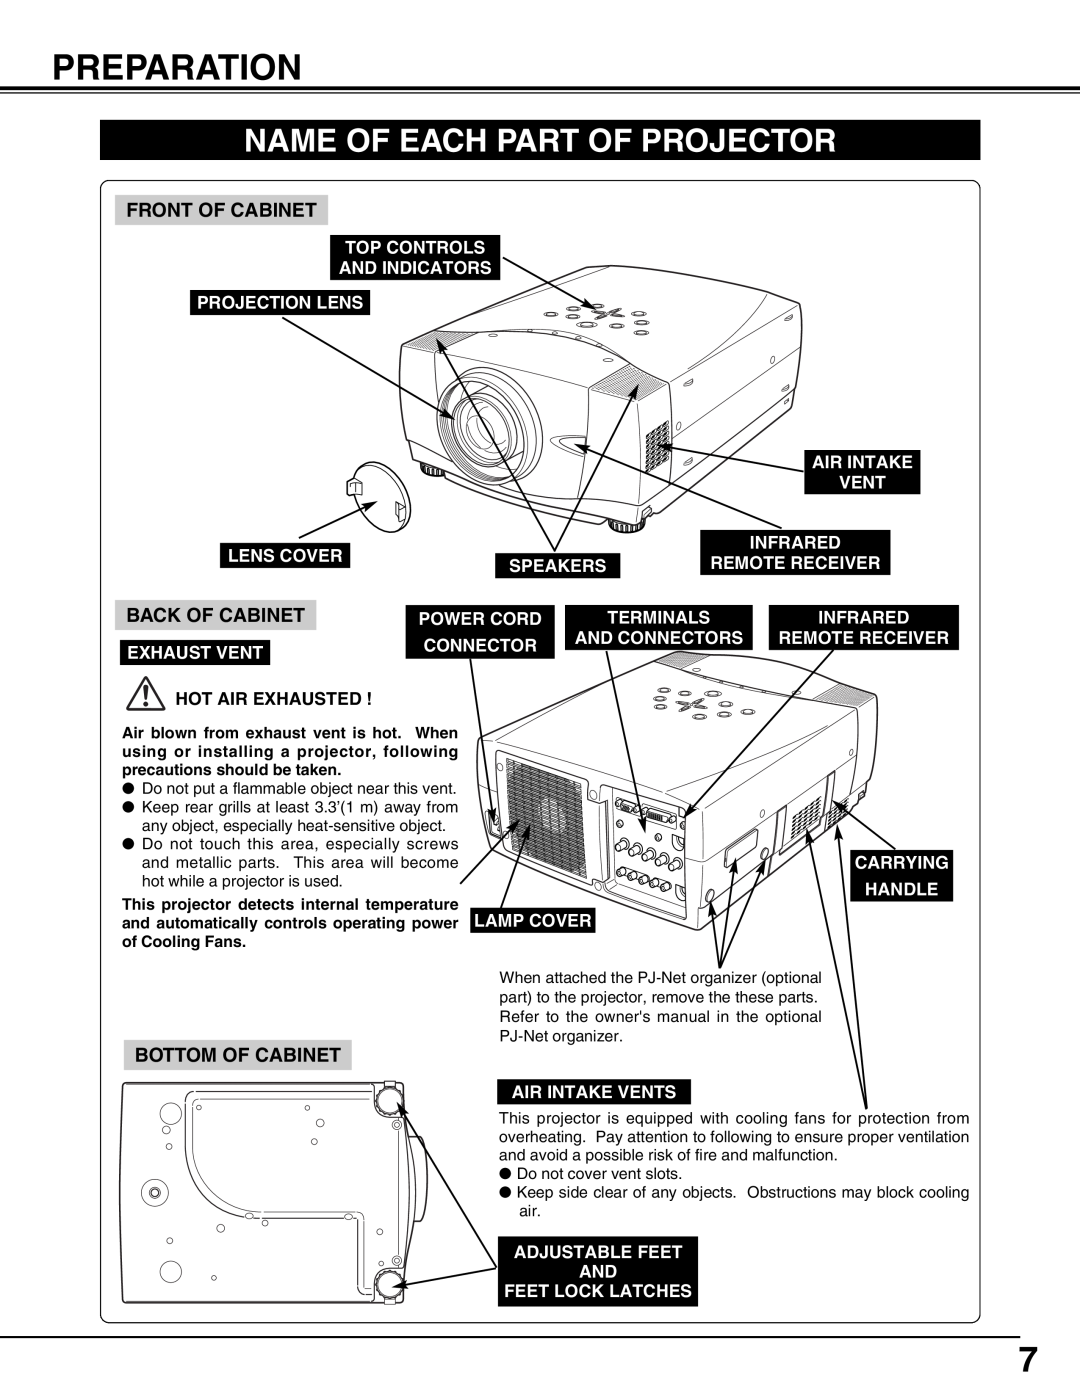 Sanyo PLV-75/PLV-80 Preparation, Name Of Each Part Of Projector, Front Of Cabinet, Back Of Cabinet, Bottom Of Cabinet 